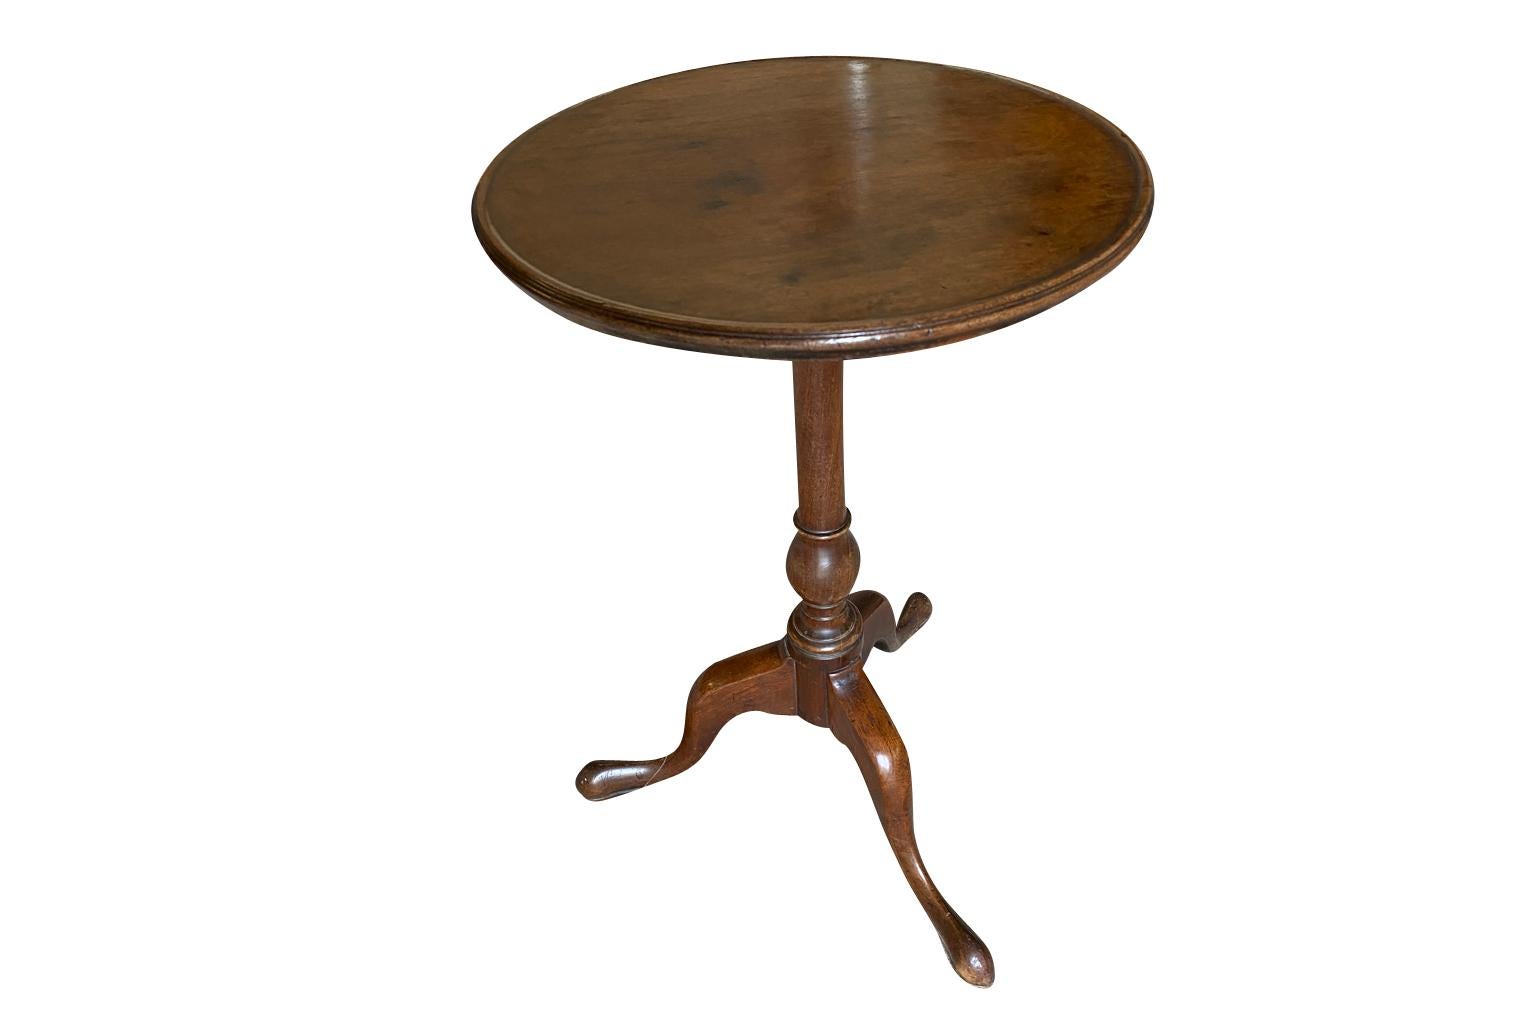 A very lovely French 19th century Gueridon.  Wonderfully constructed from walnut with great patina.  A delightful side table.